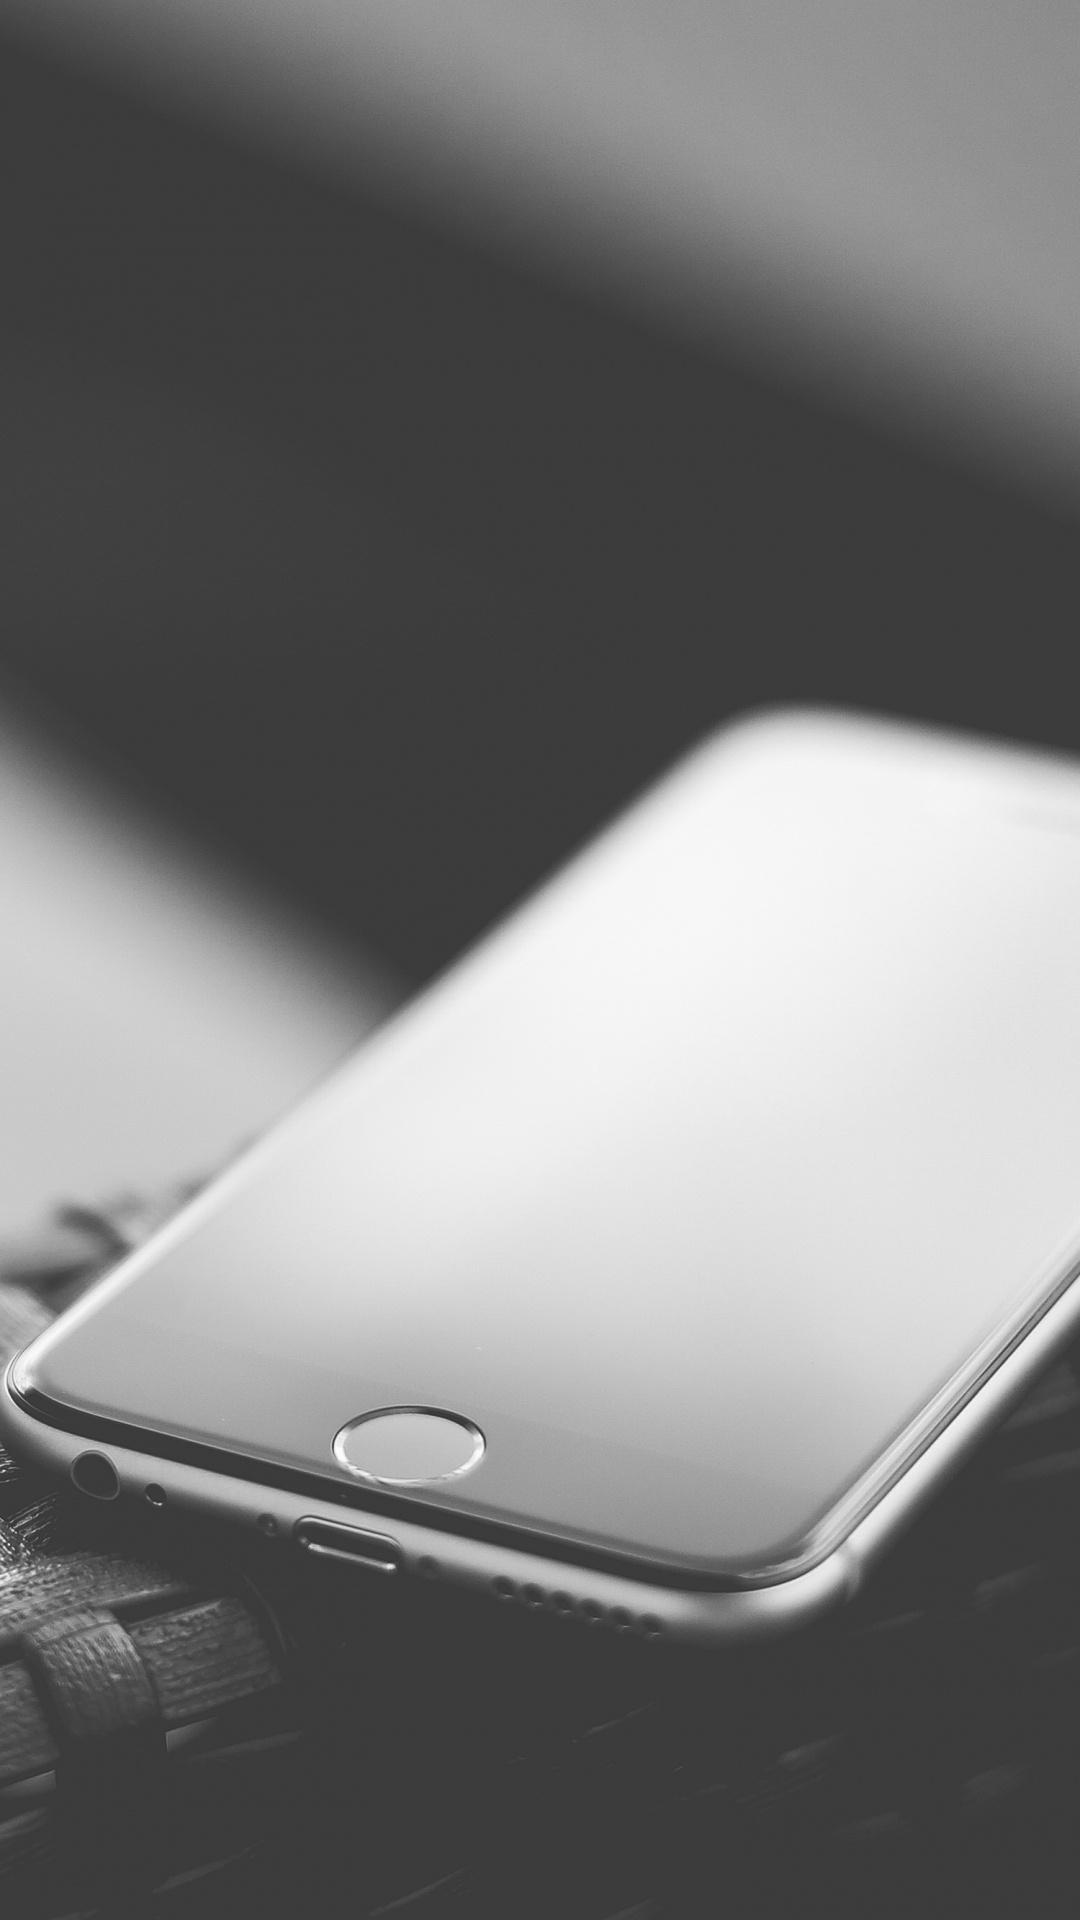 White Iphone 5 c on White Textile. Wallpaper in 1080x1920 Resolution